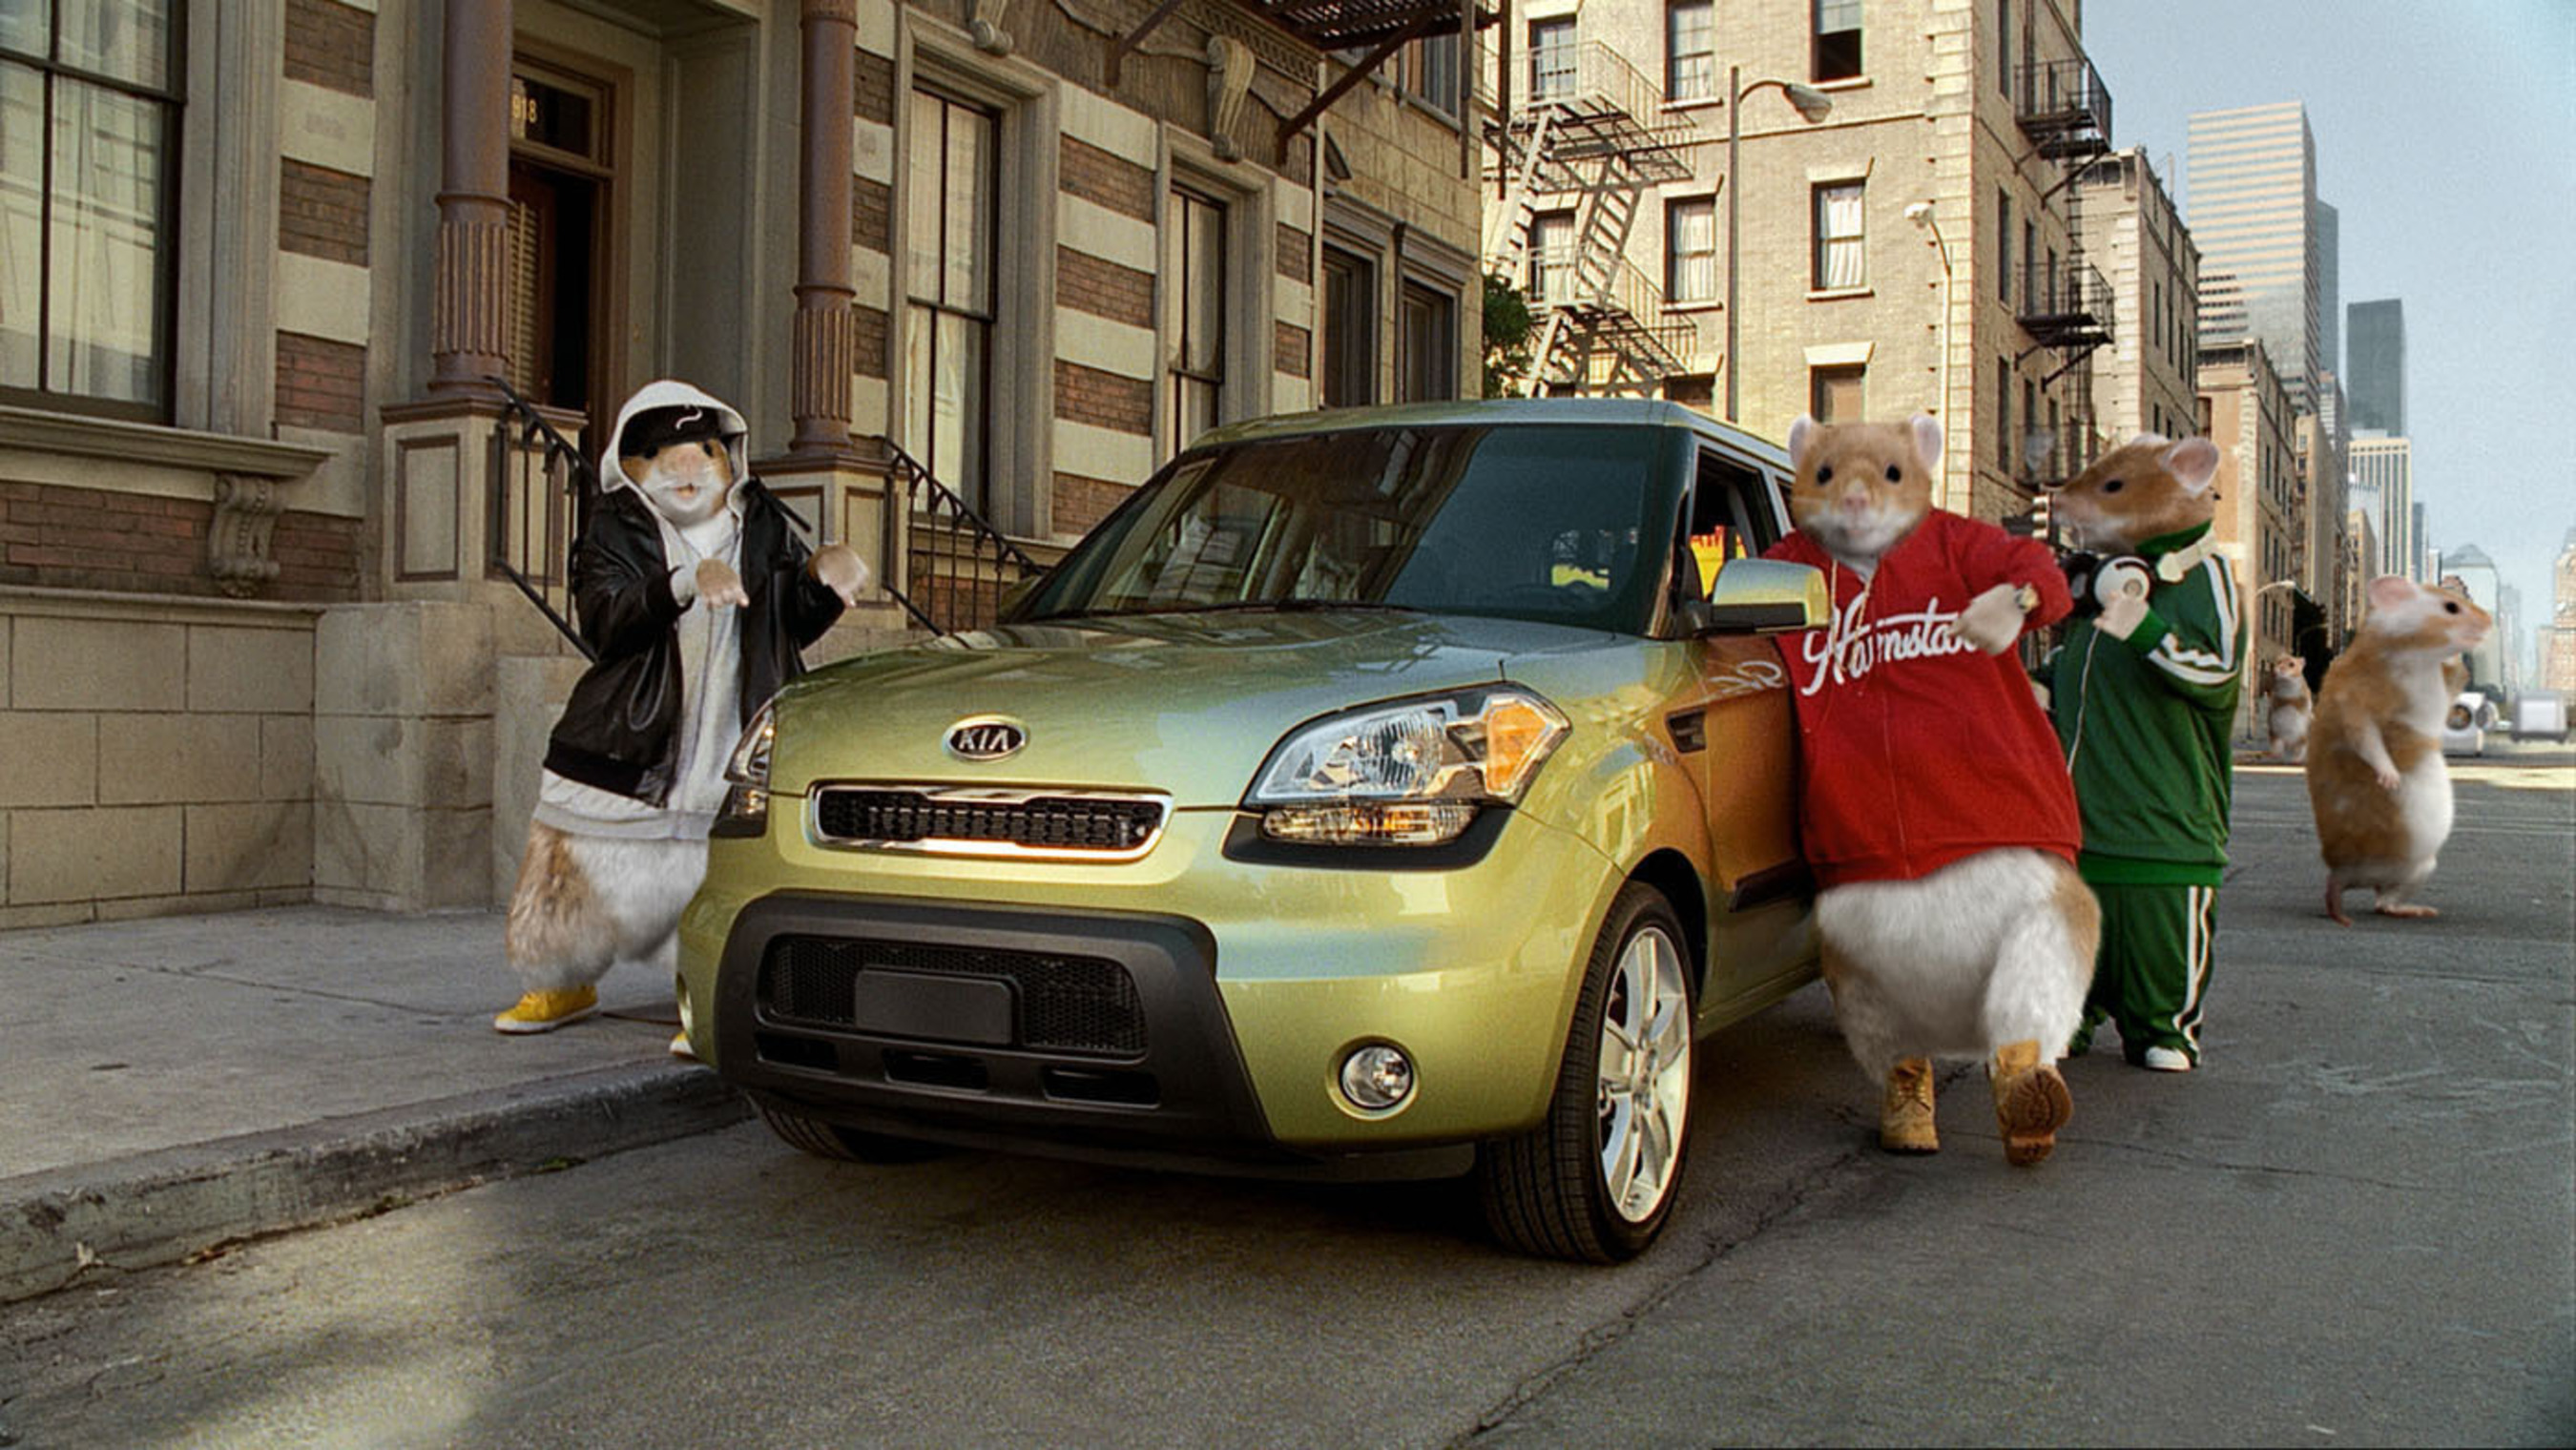 Kia Motors' Advertising Campaign Featuring Music-Loving Hamsters Wins Gold  Effie at the 2011 North American Effie Awards